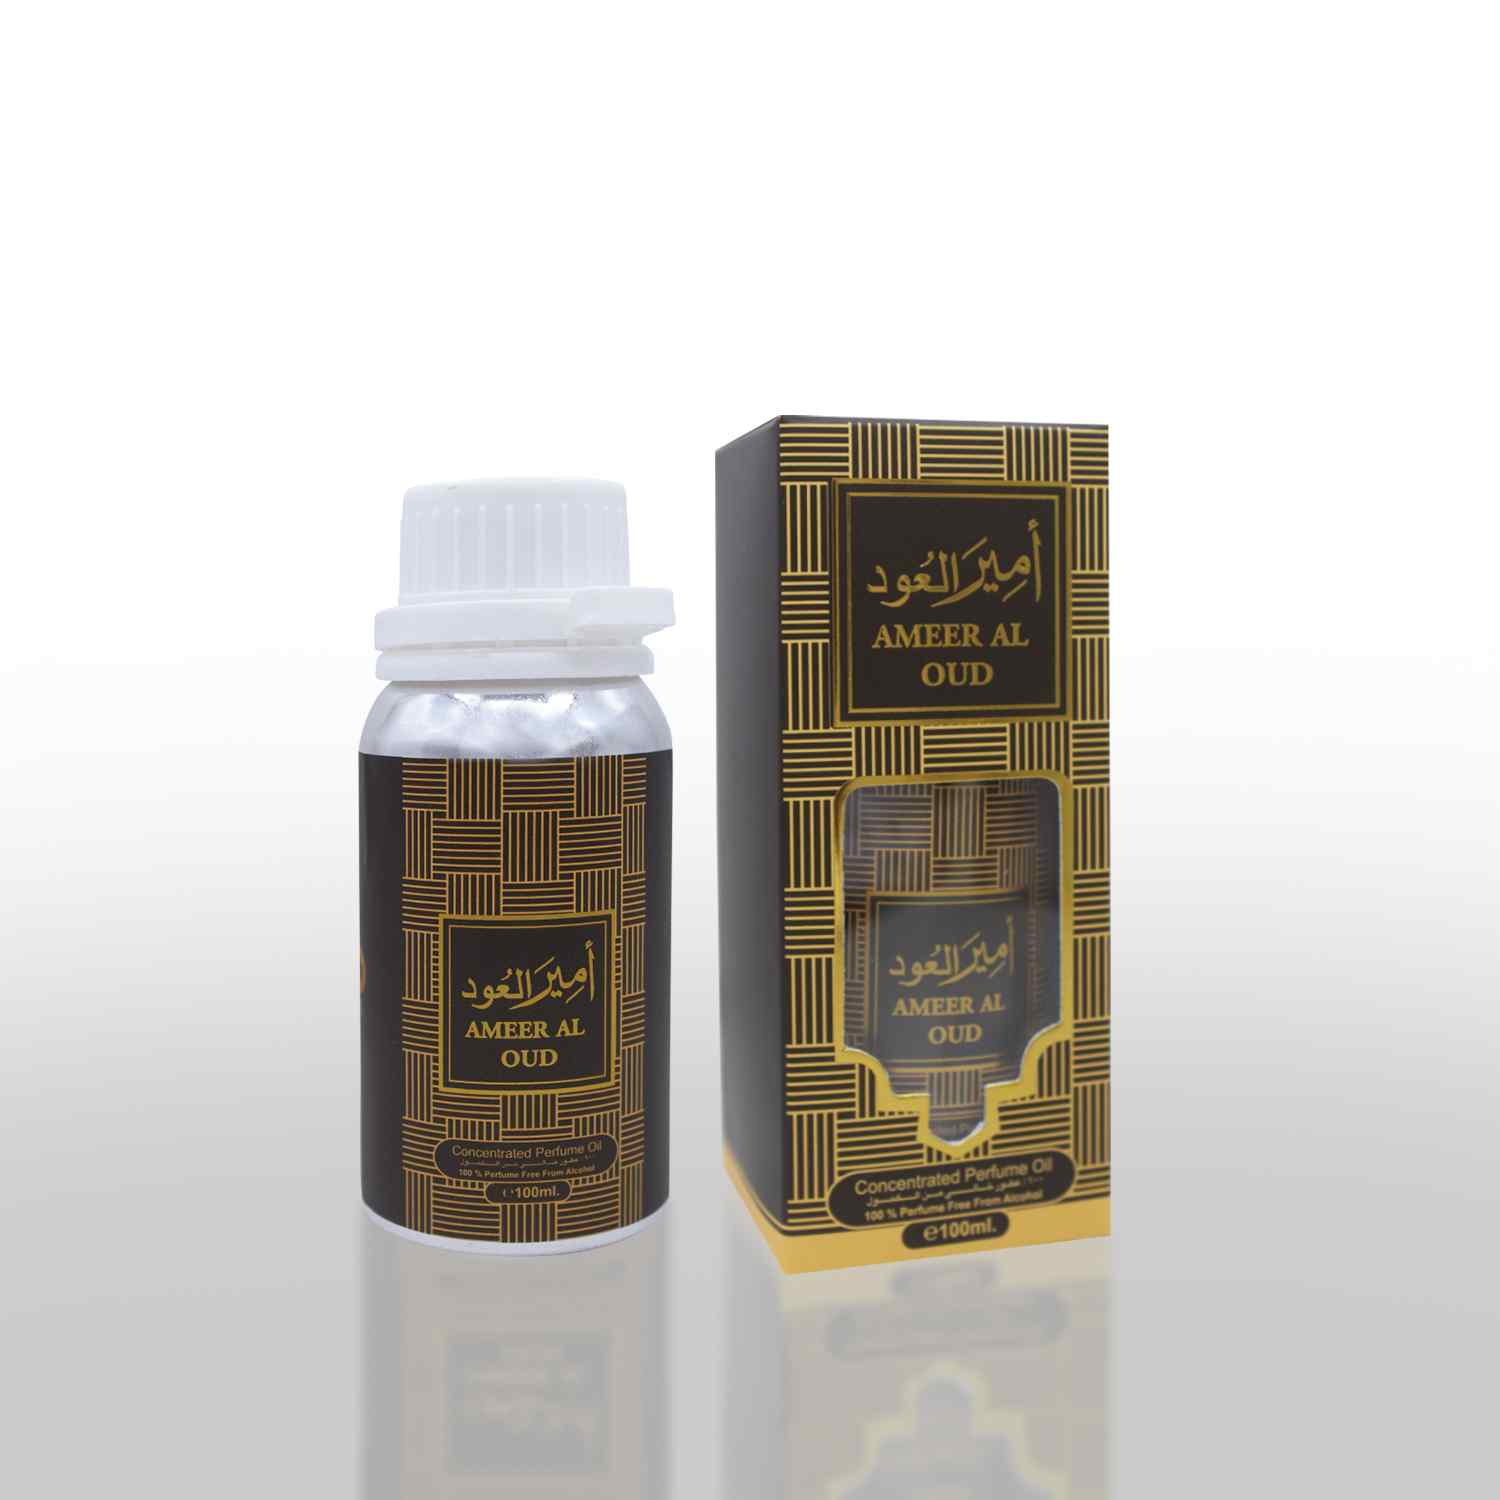 Ameer al Oud concentrated perfume oils which is a product of ARD PERFUMES, made in uae